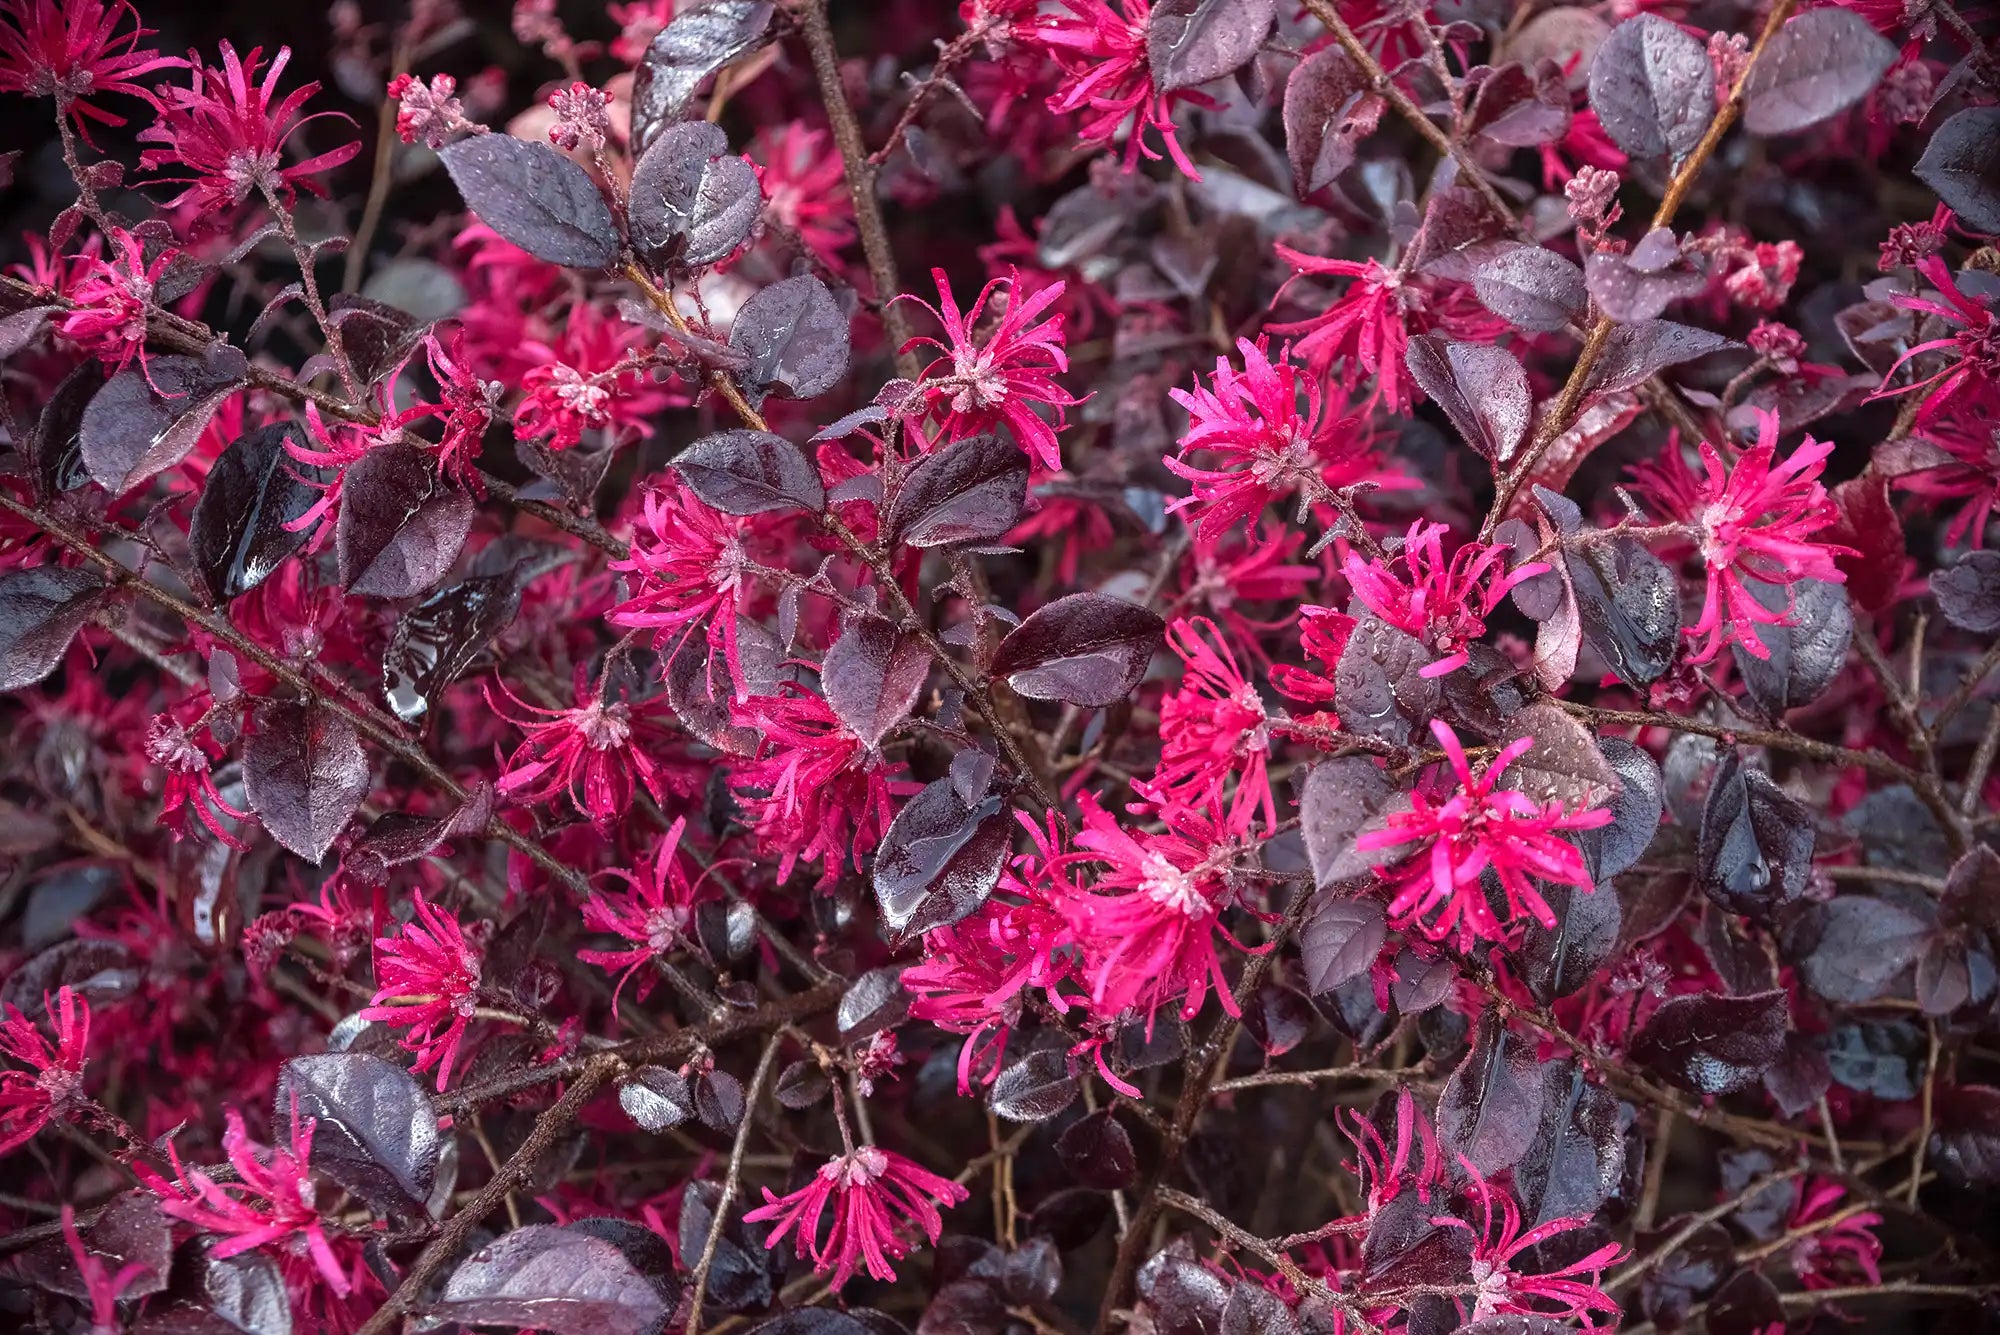 If one on these brilliant, very red fringe flowers can attract pollinators, then dozens of these blossoms seen here should bring bees, butterflies and other pollinators out in force. Equaly beautiful are the purple, almost black leaves of this loropetalum.